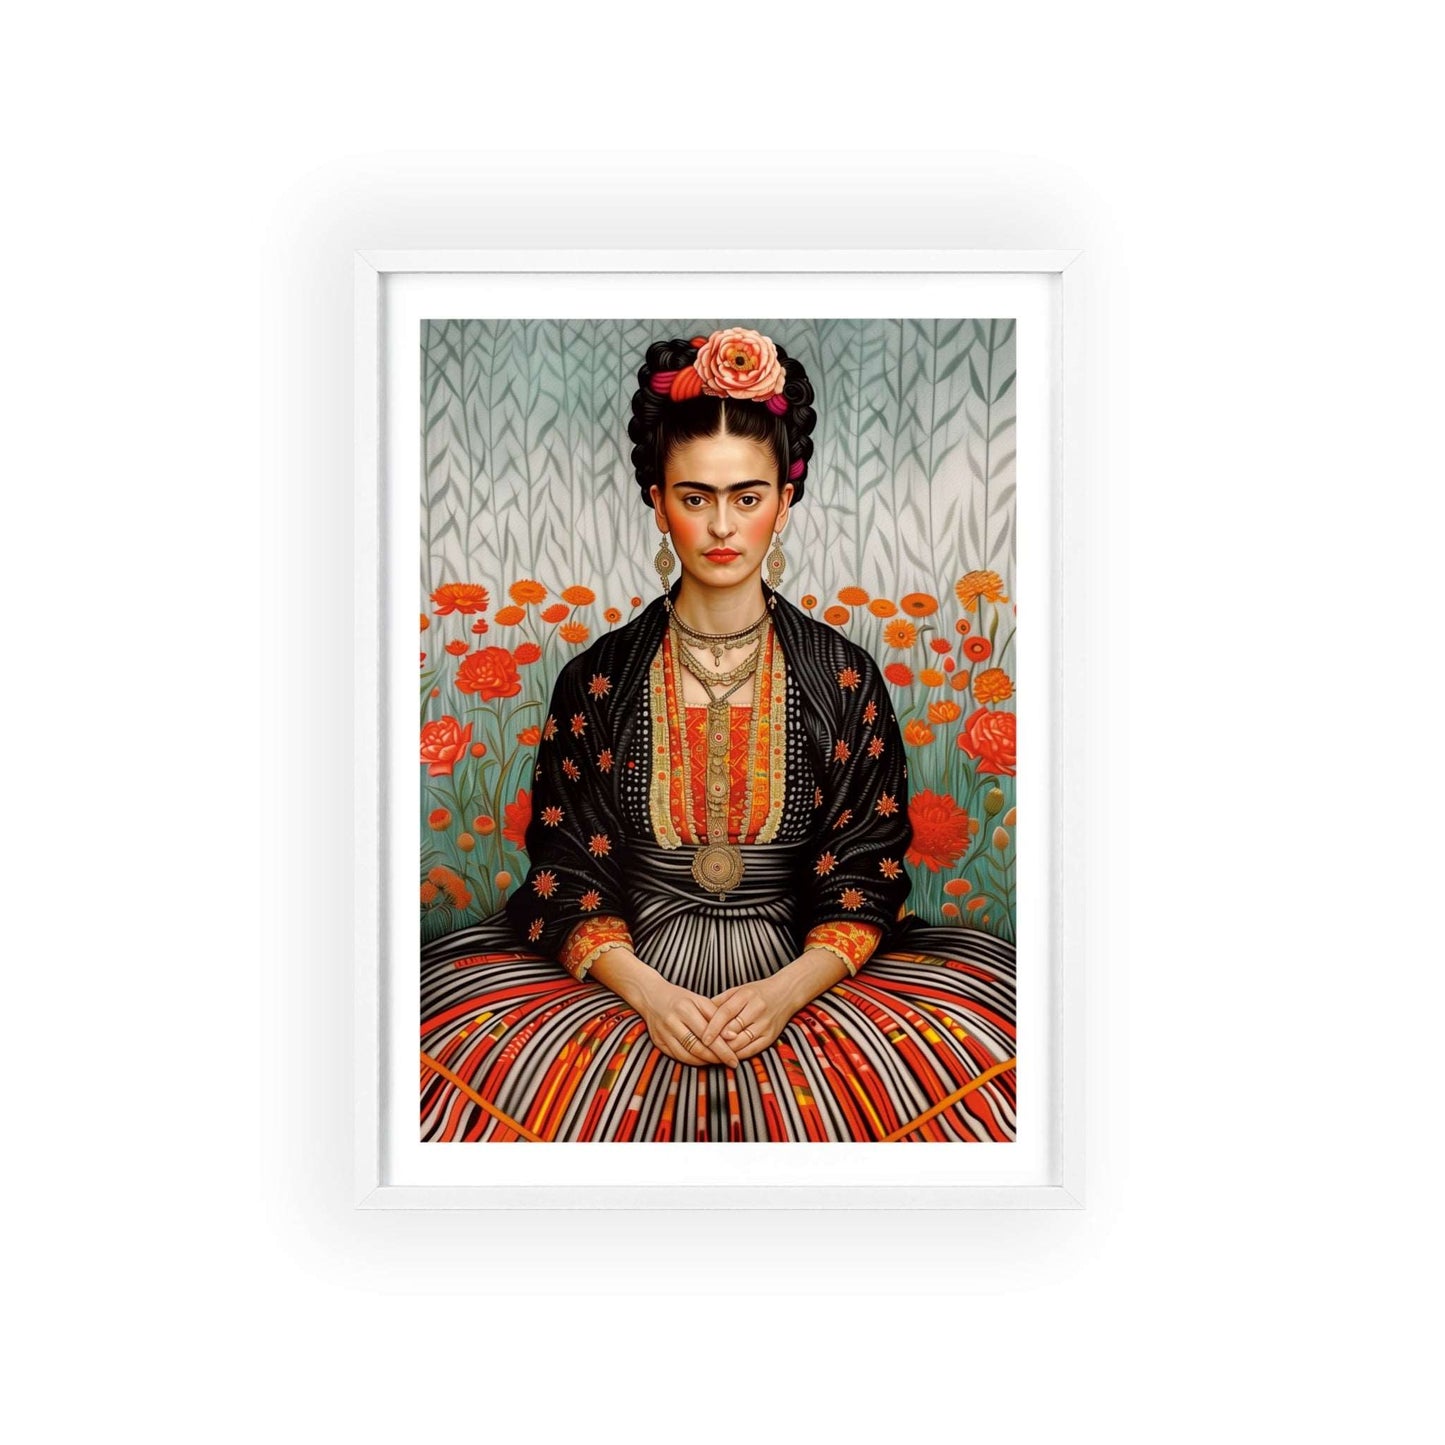 Minimalist poster featuring Frida Kahlo sitting in a field of flowers.  The poster is black and white, with a focus on Frida's powerful gaze and unibrow.  The poster is framed.